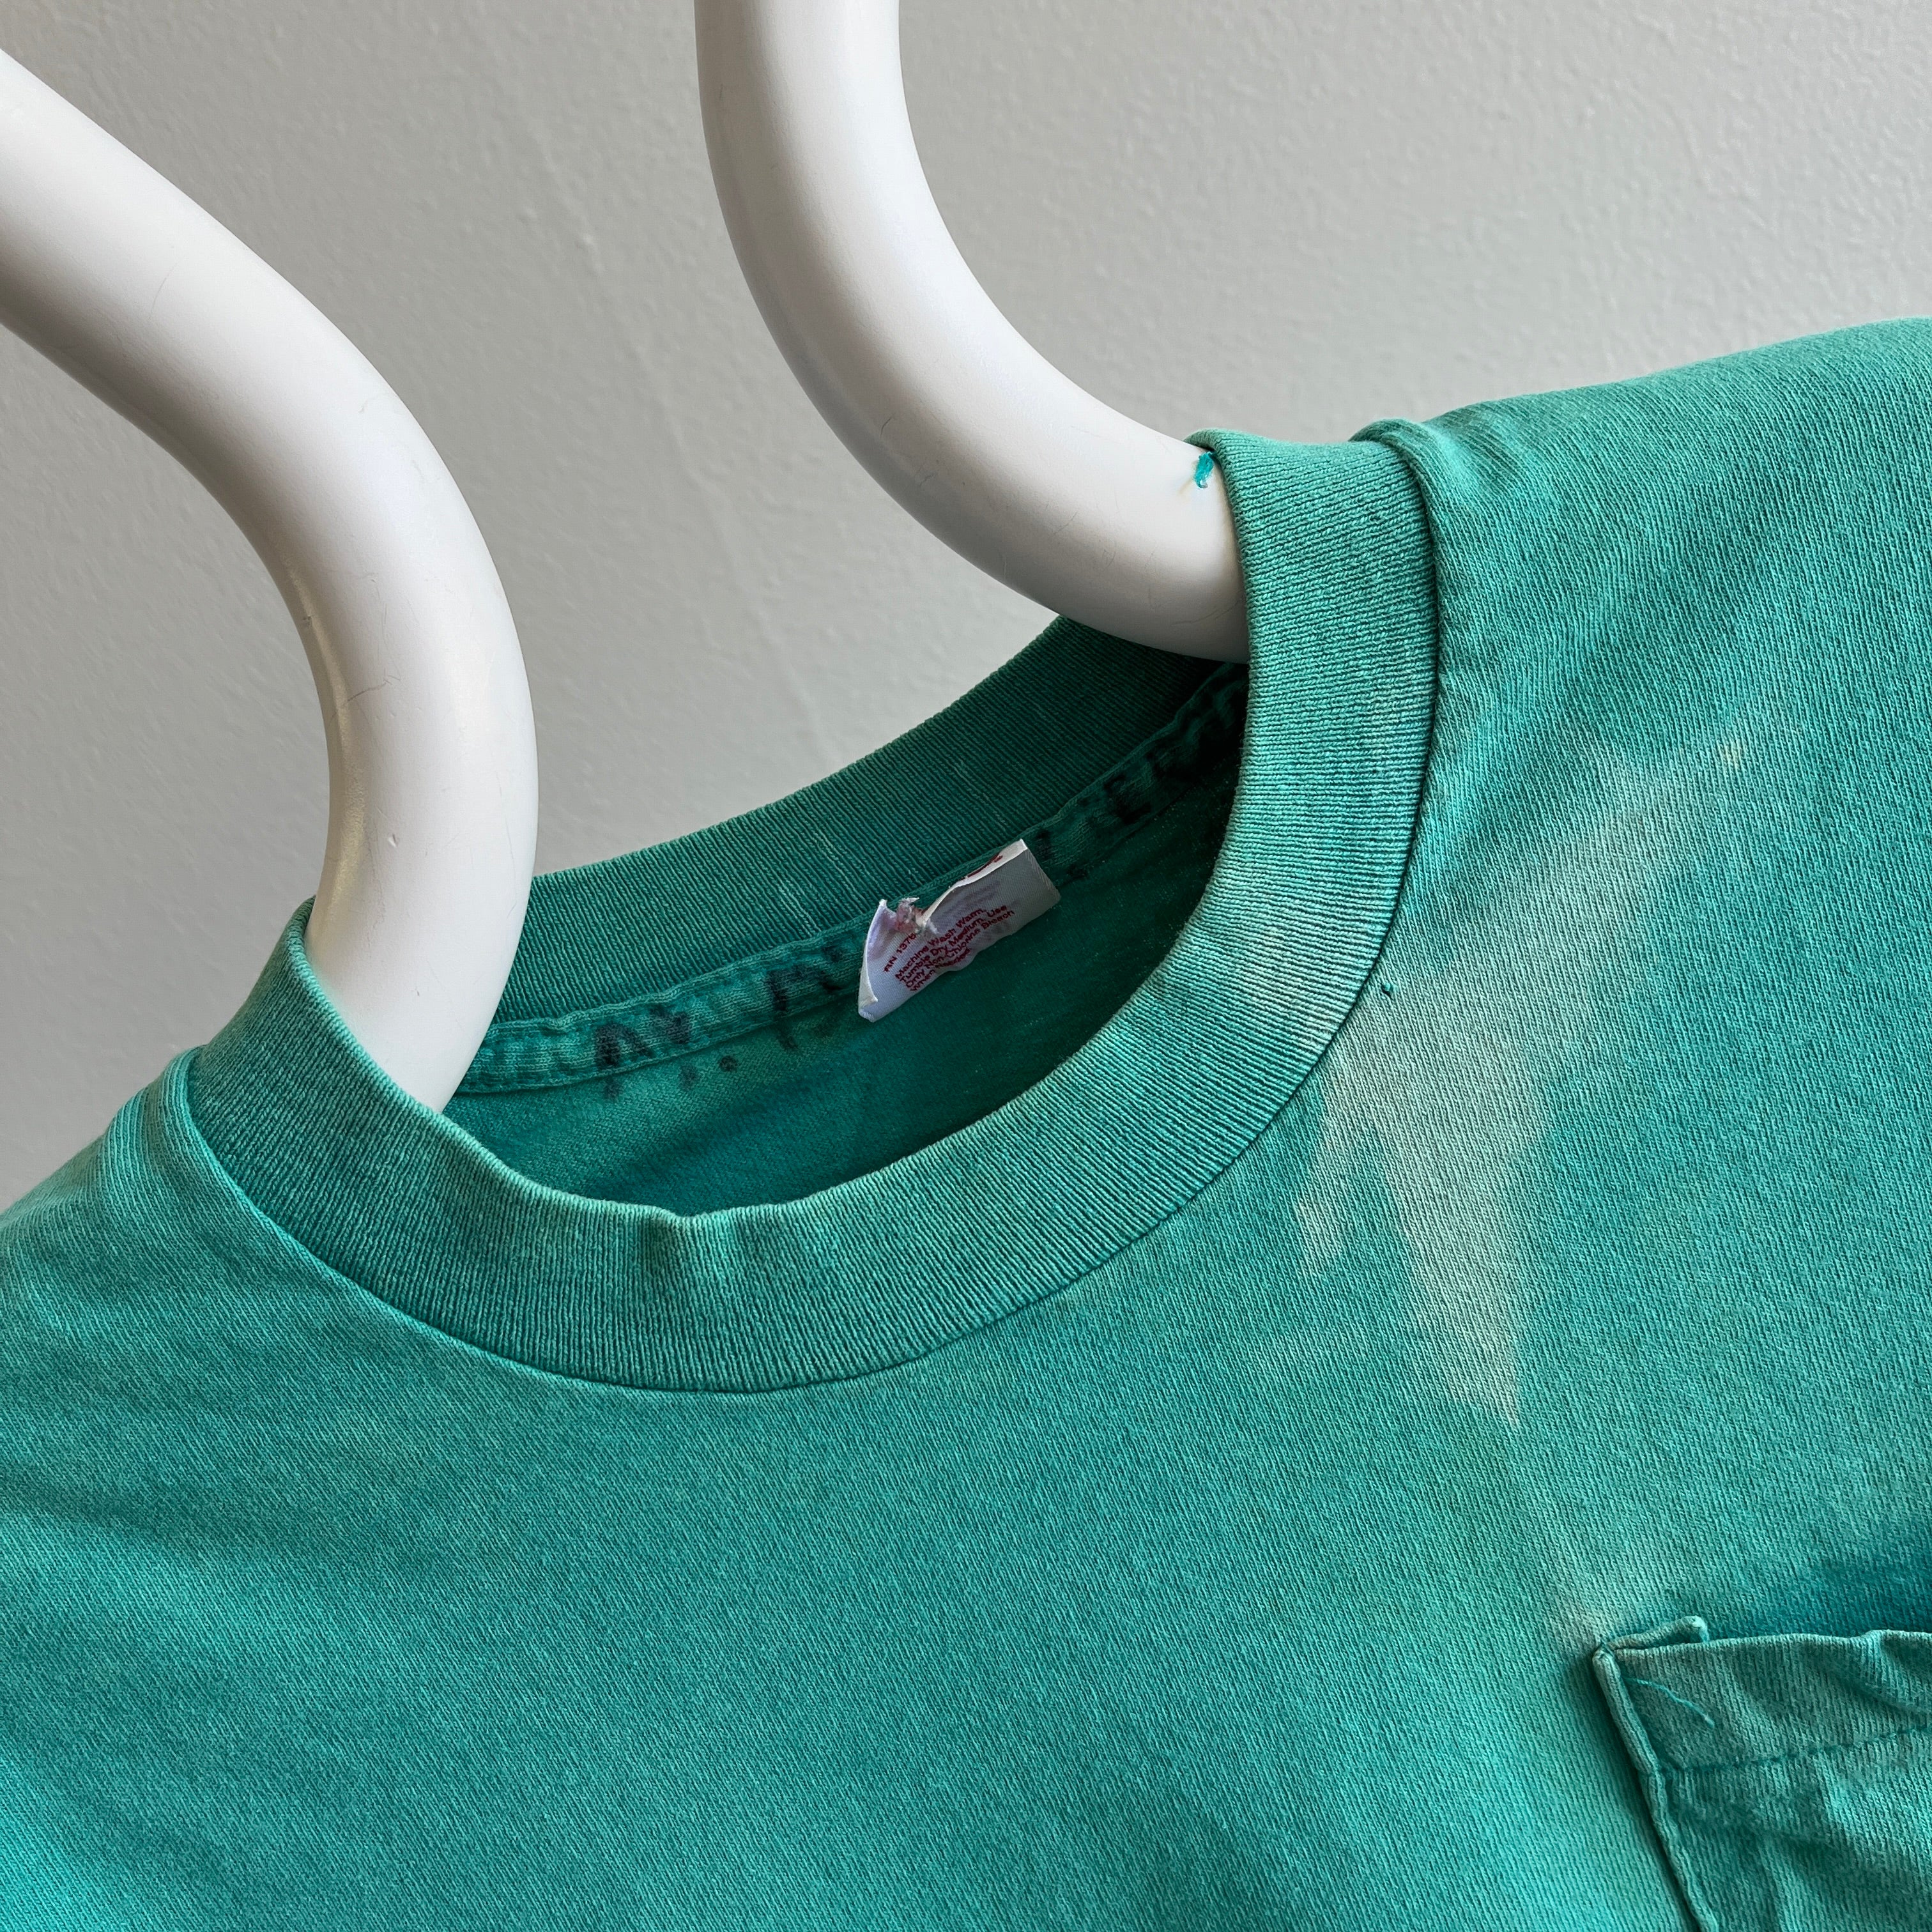 1990s Bleach Stained Teal Pocket T-Shirt by BVD